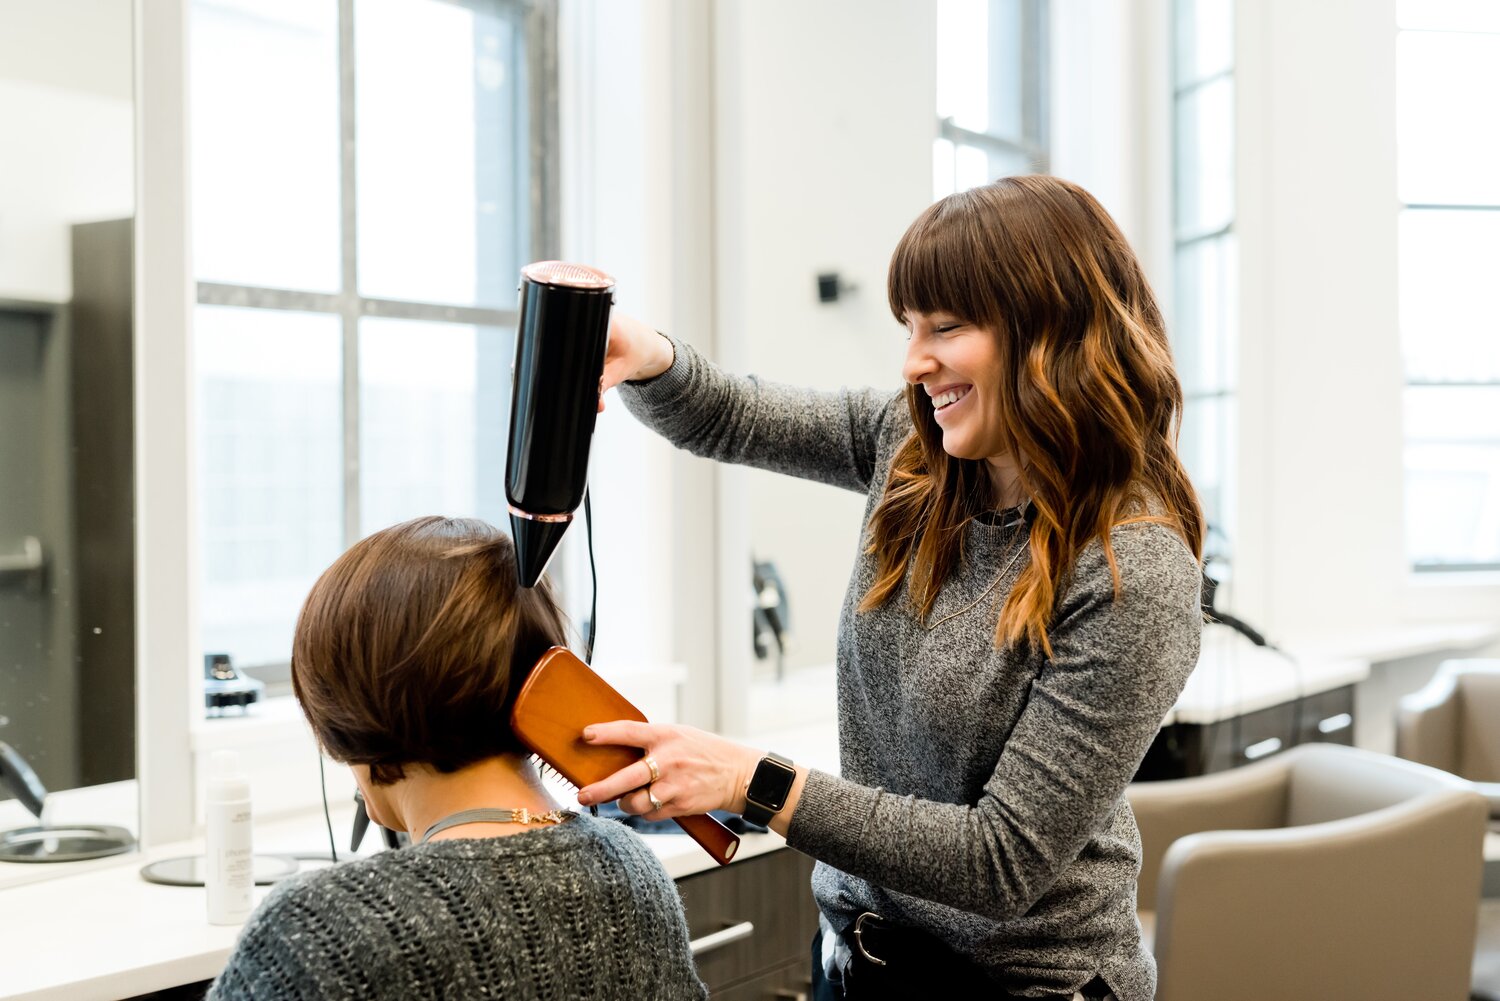 How long does it take to become a hairstylist?